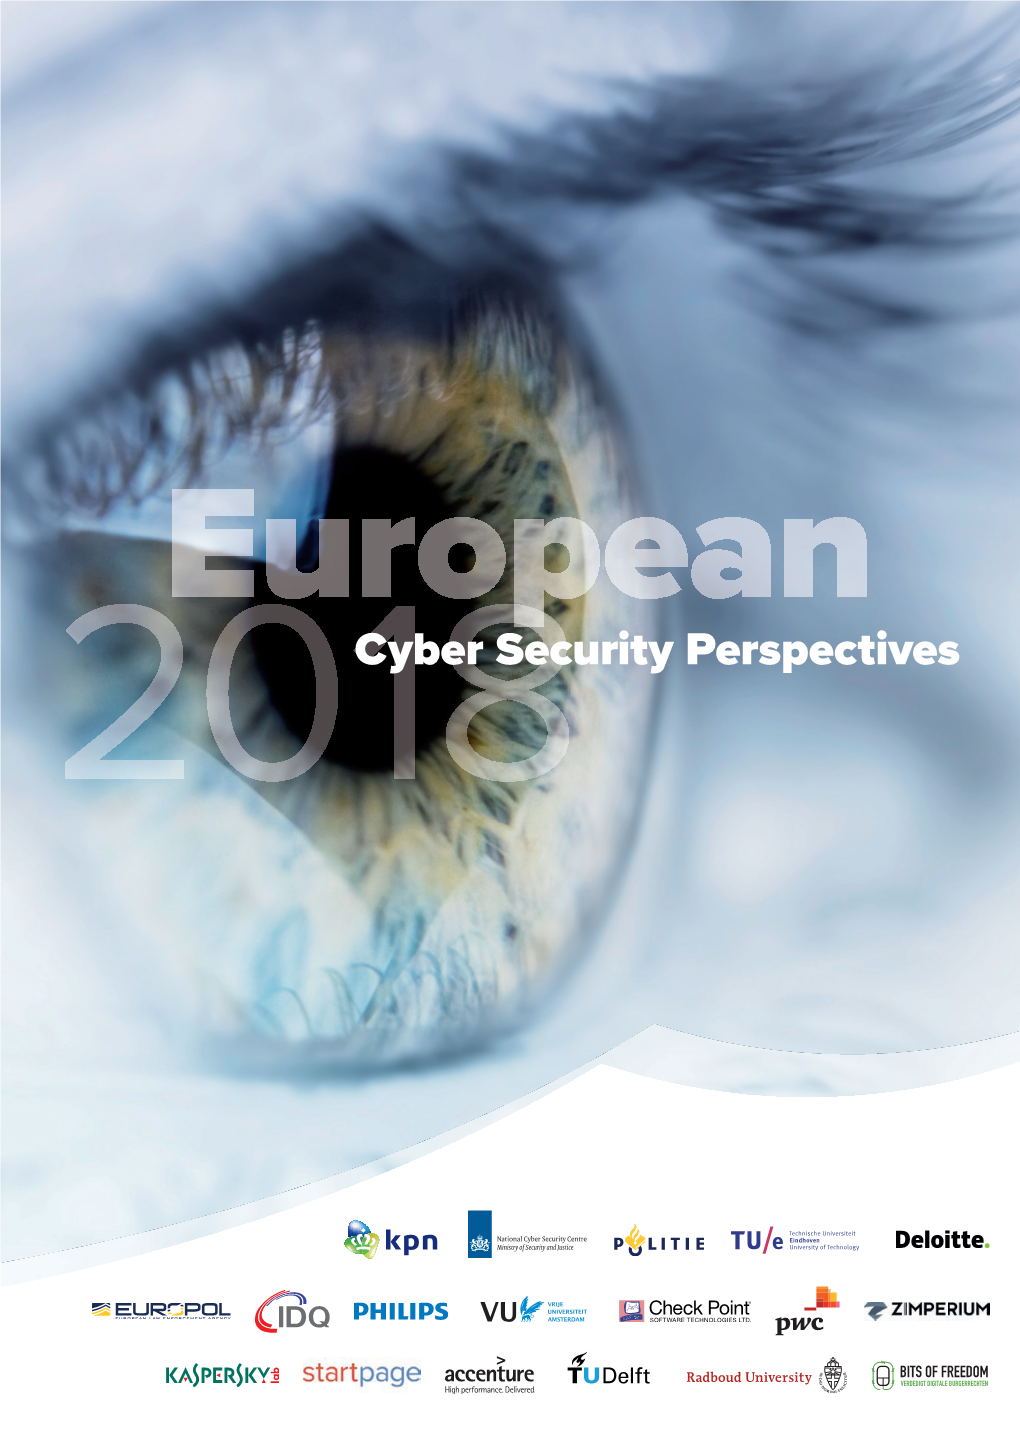 European Cyber Security Perspectives 2018 | 1 Preface